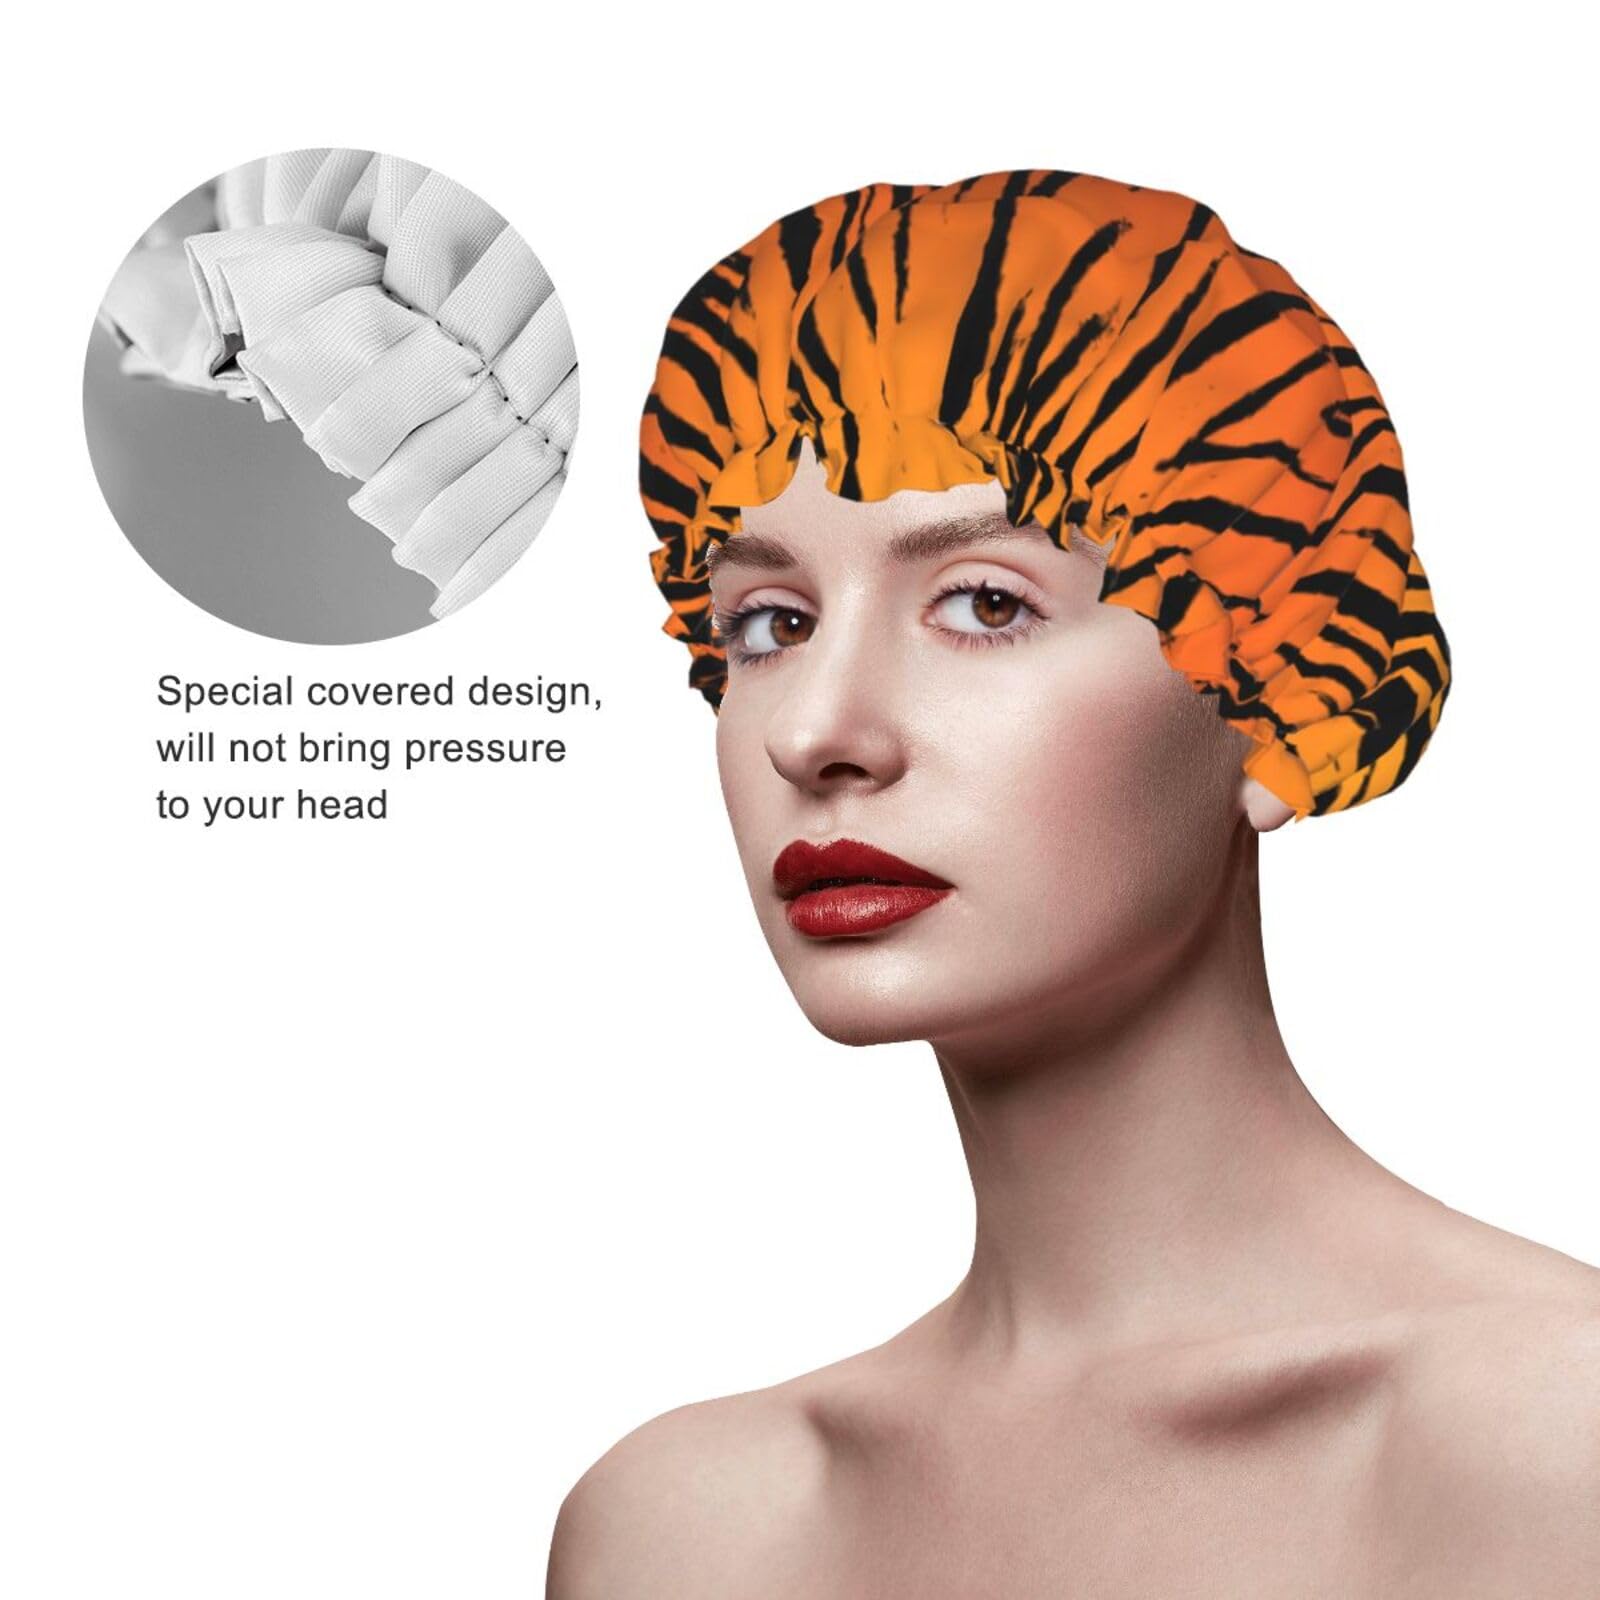 Double Layer Waterproof Shower Cap for Women,Portable Hair Protection for Long Hair,Versatile Bath Accessory Tiger Stripe